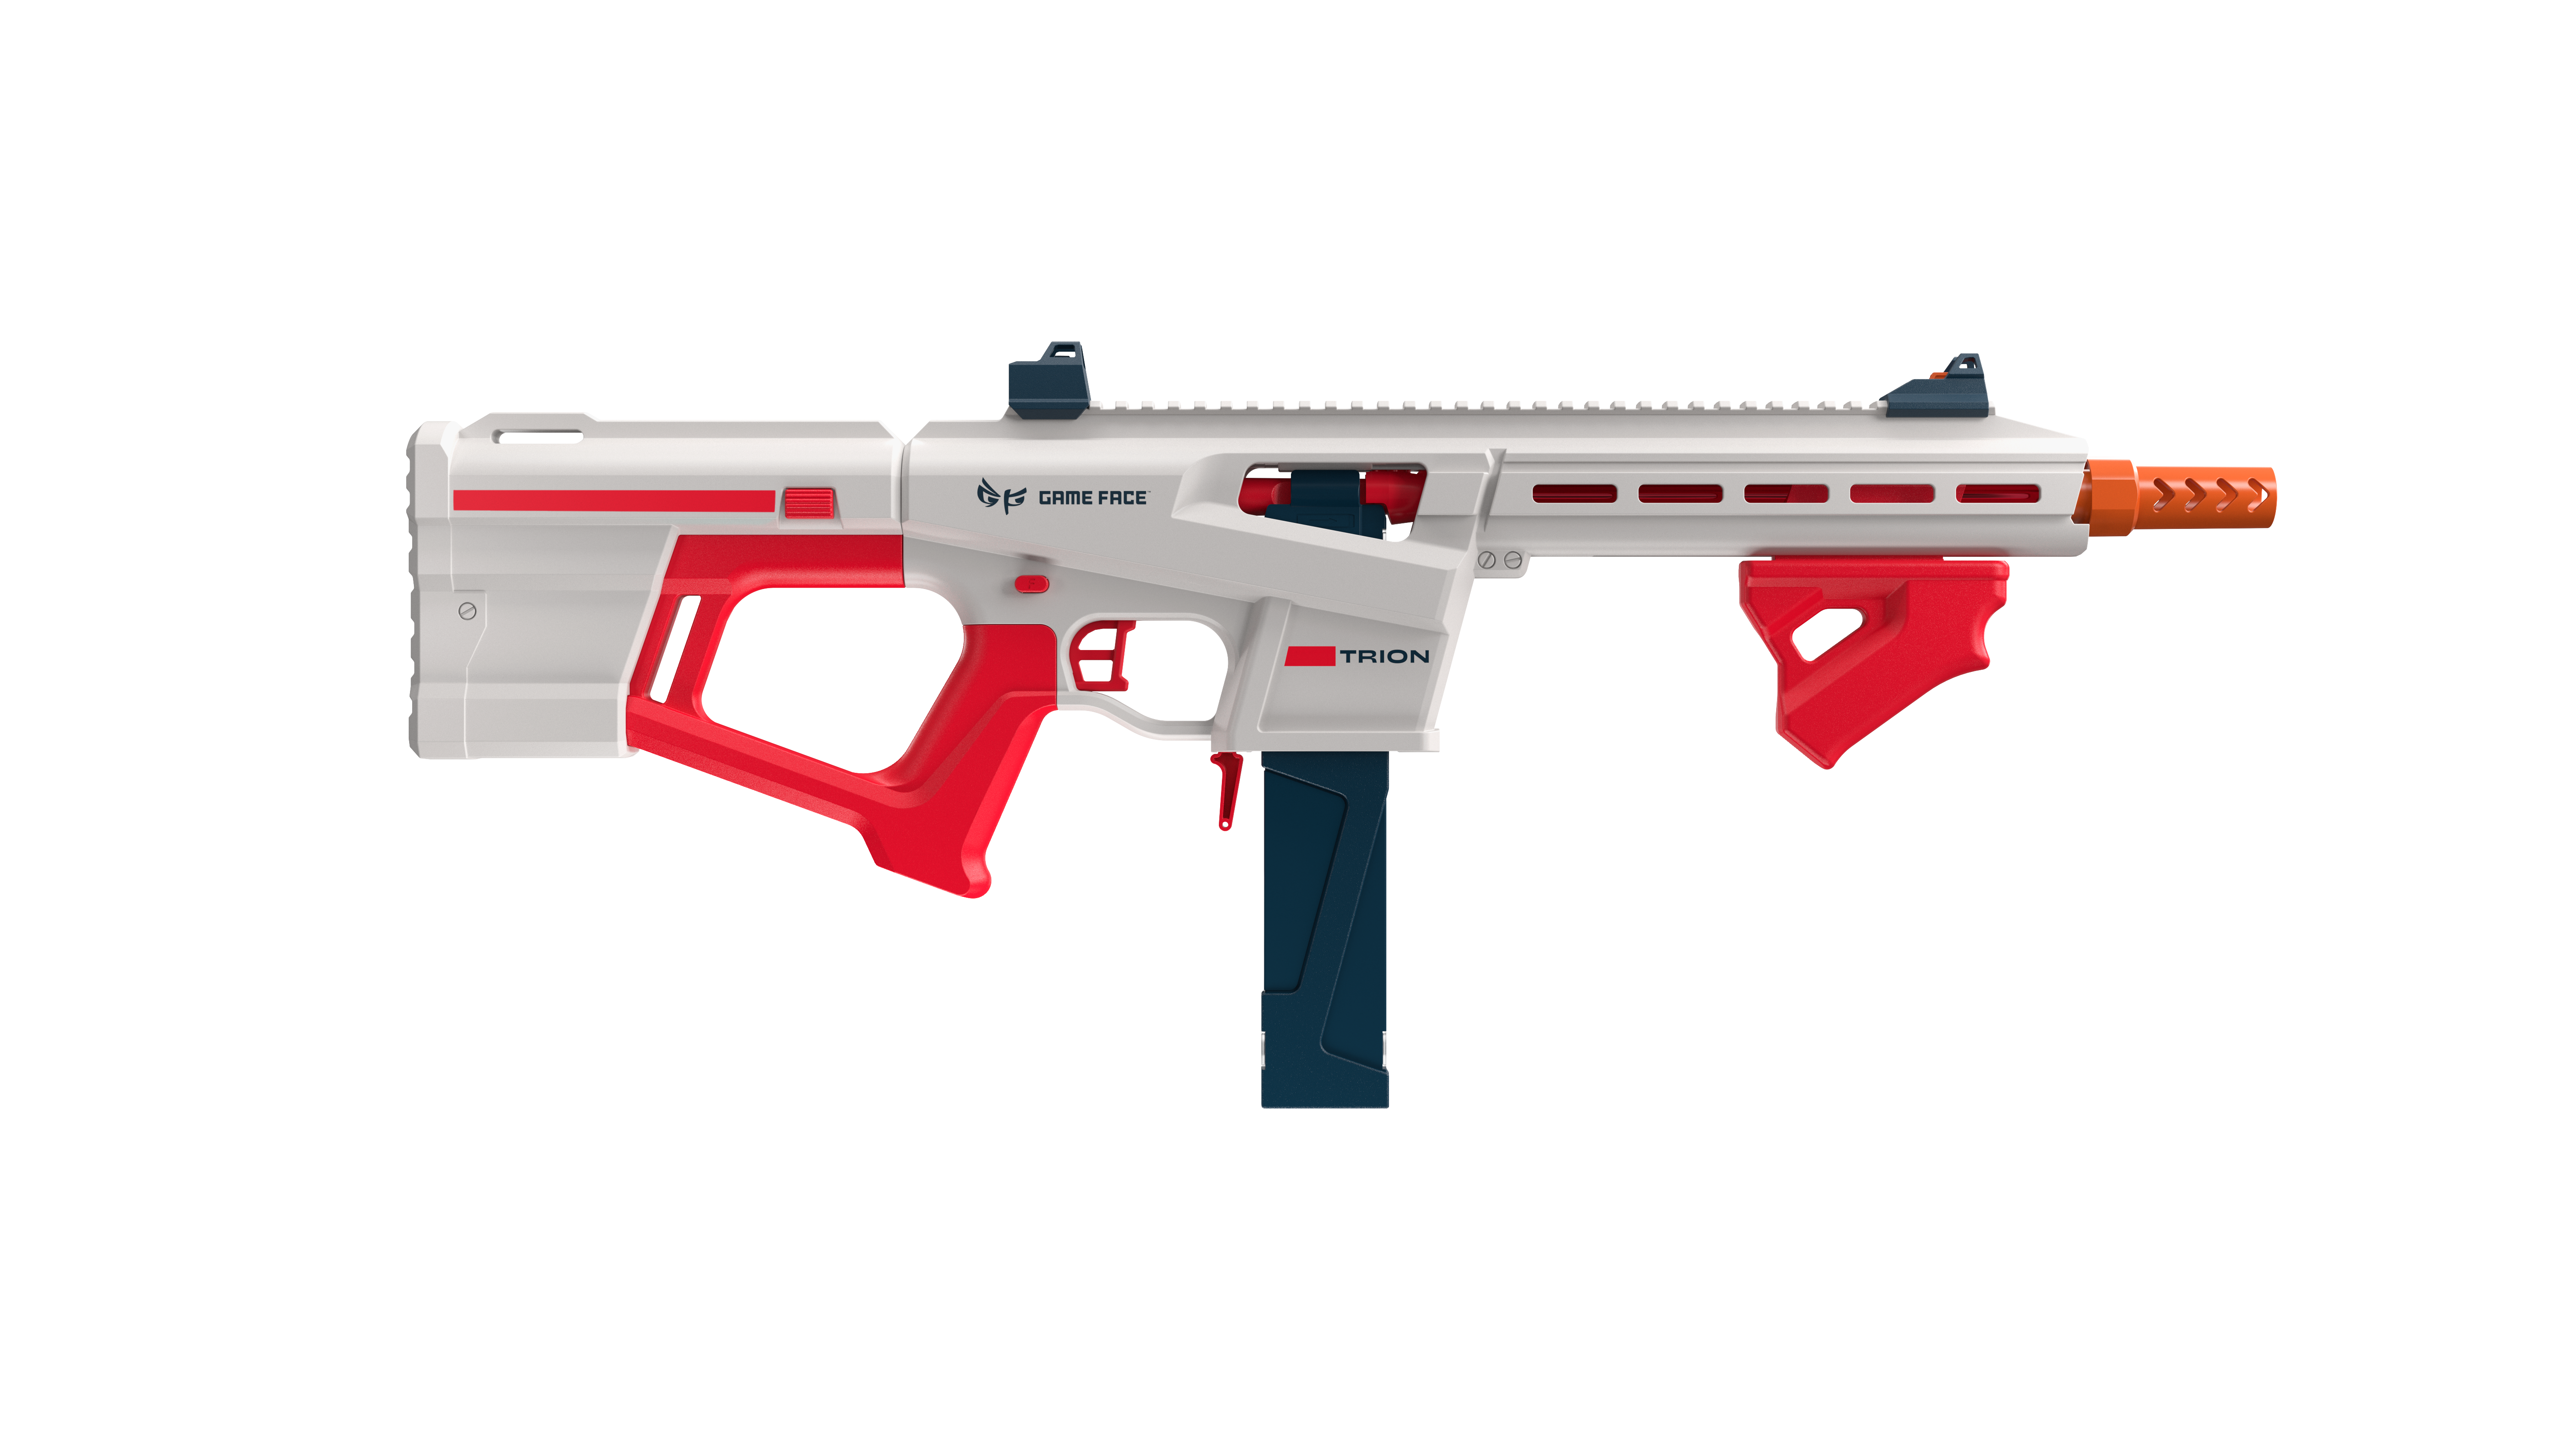 Game Face Trion Competition Foam Dart Blaster, up to 200 FPS, 15 Darts, Ages 14+, Red - image 2 of 9